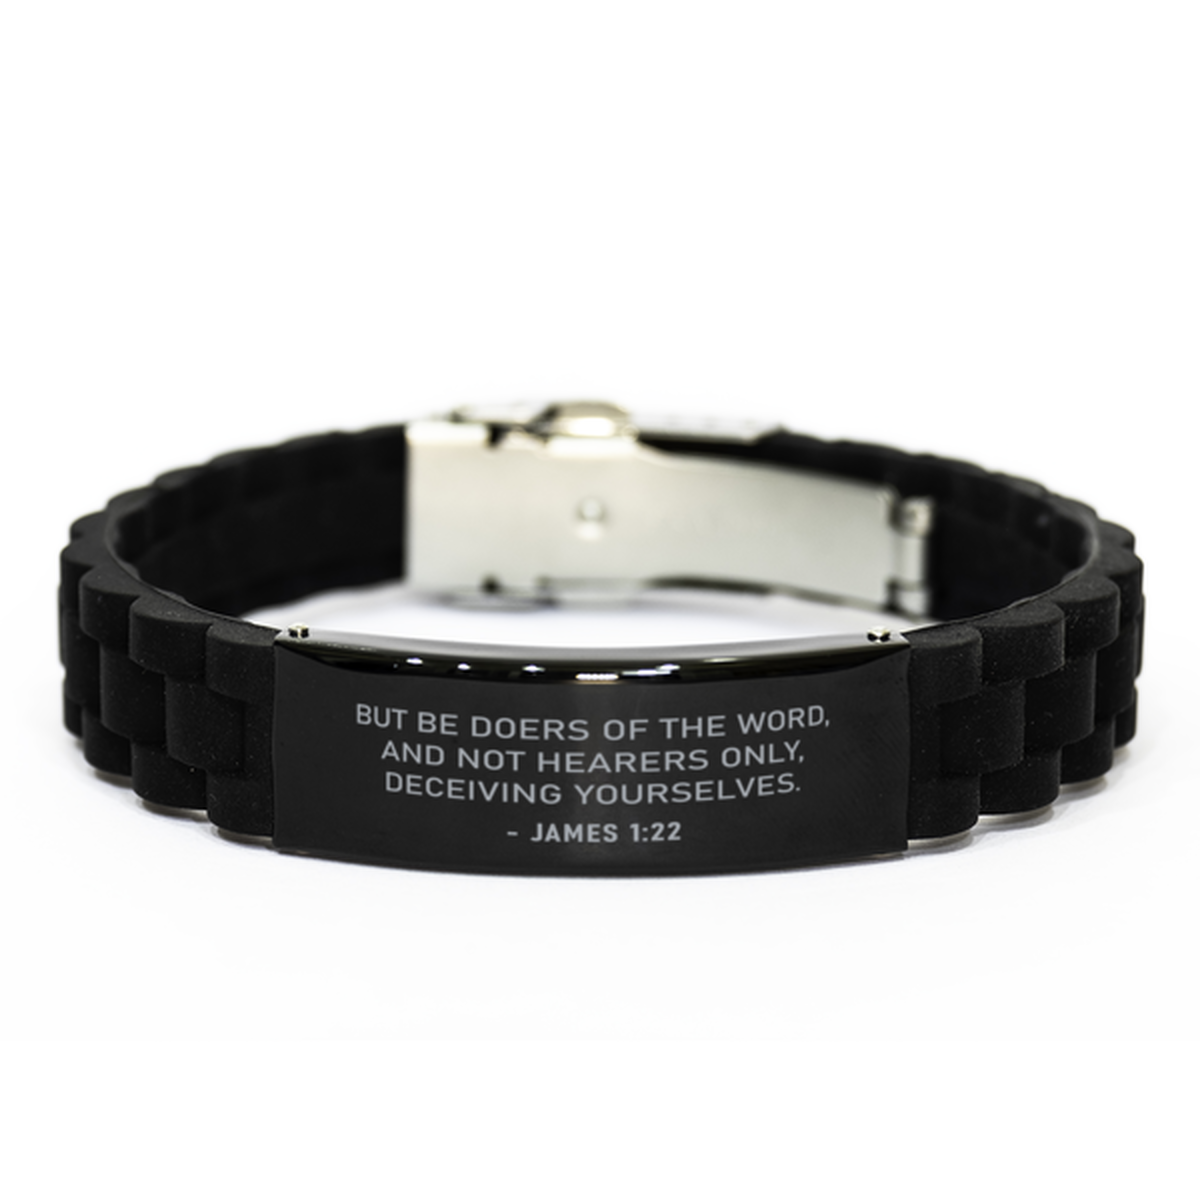 Bible Verse Black Bracelet,, James 1:22 But Be Doers Of The Word, And Not Hearers Only,, Inspirational Christian Gifts For Men Women